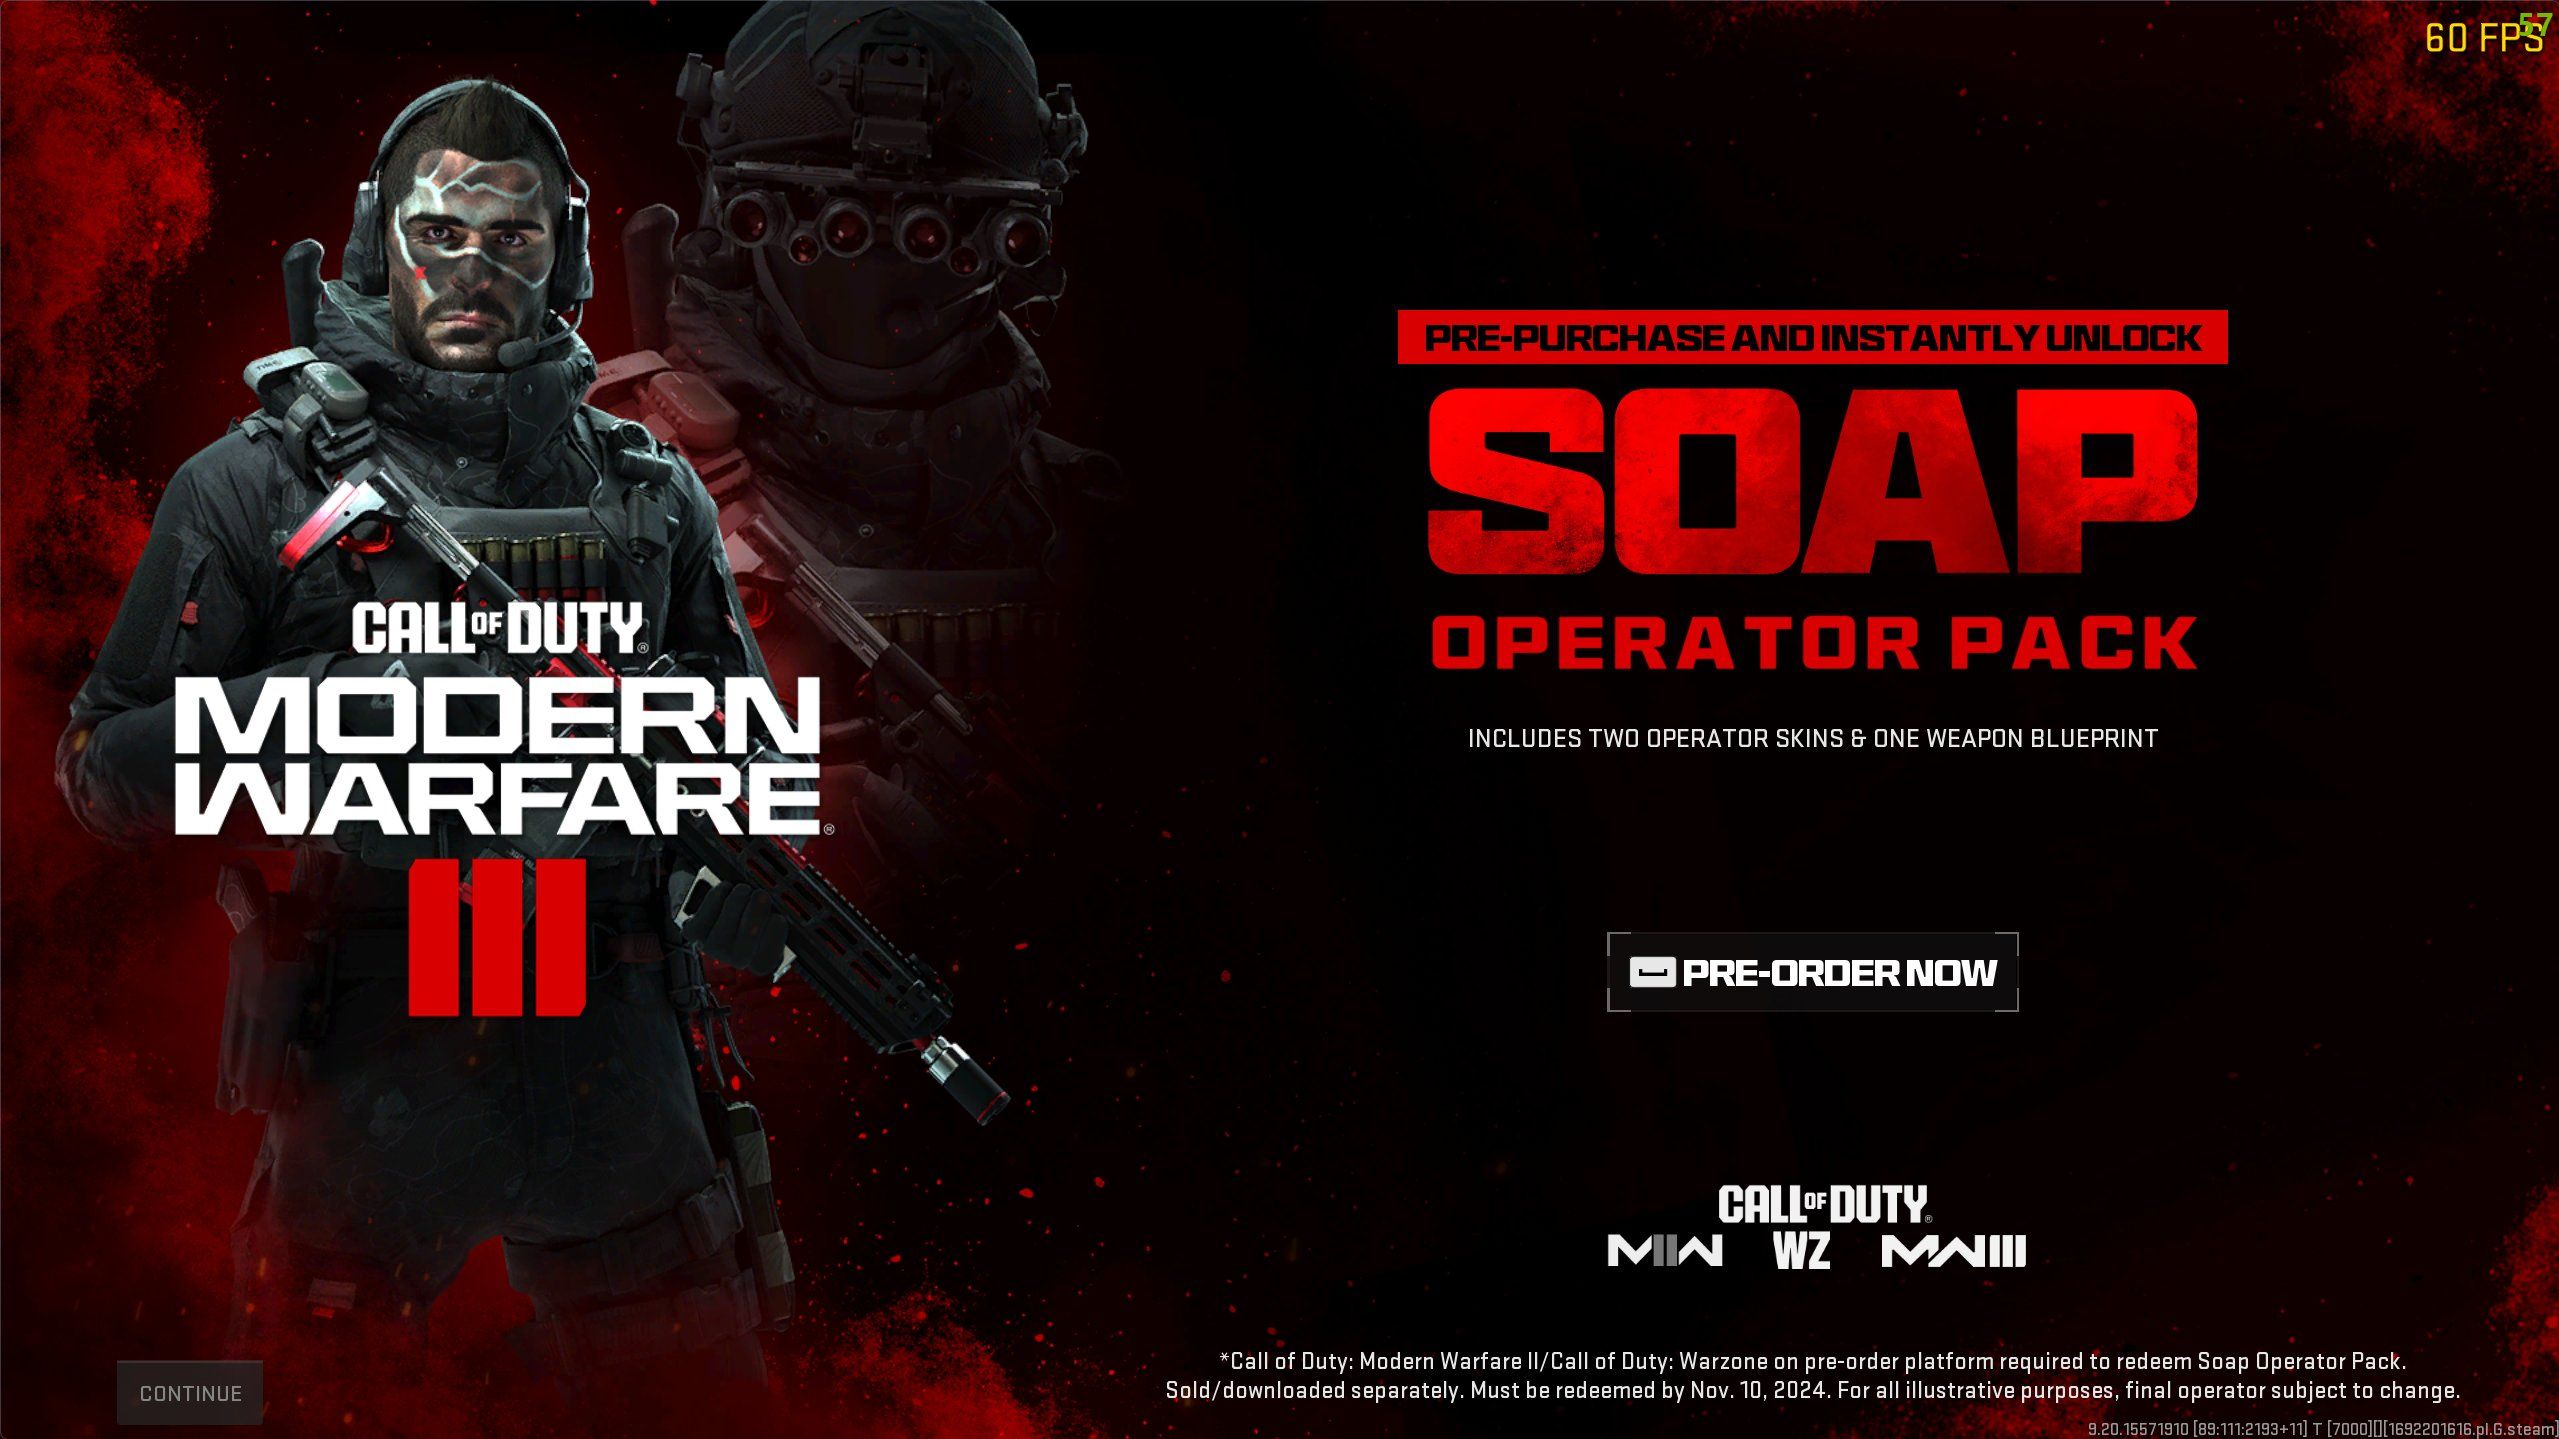 Modern Warfare 3 reveal event in CoD Warzone: date, time, and